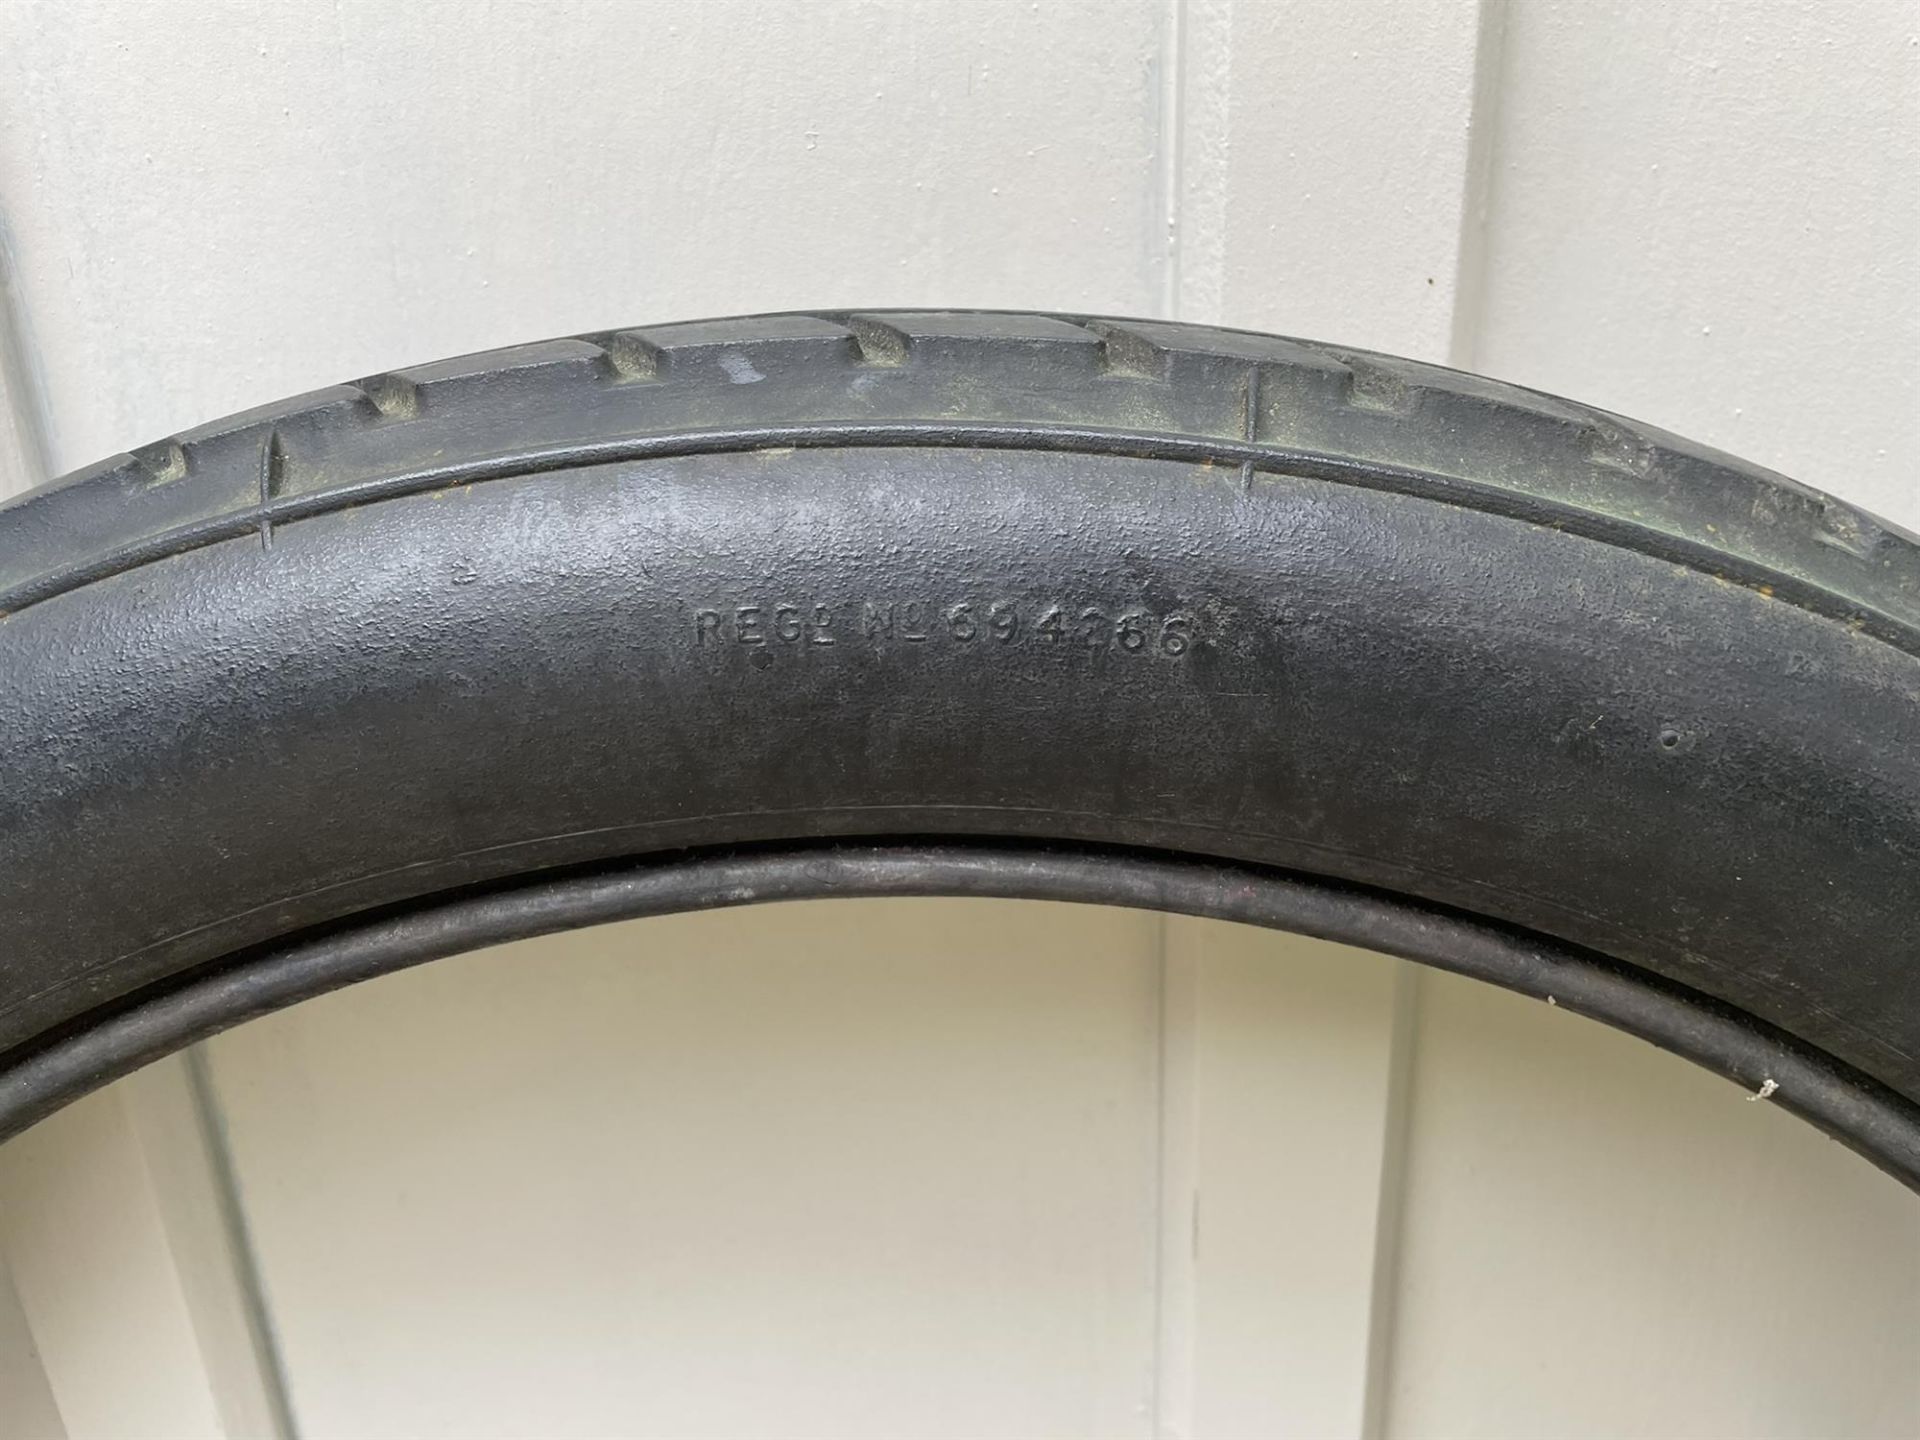 Two Vintage Dunlop Cord Road Tyres - Image 5 of 7